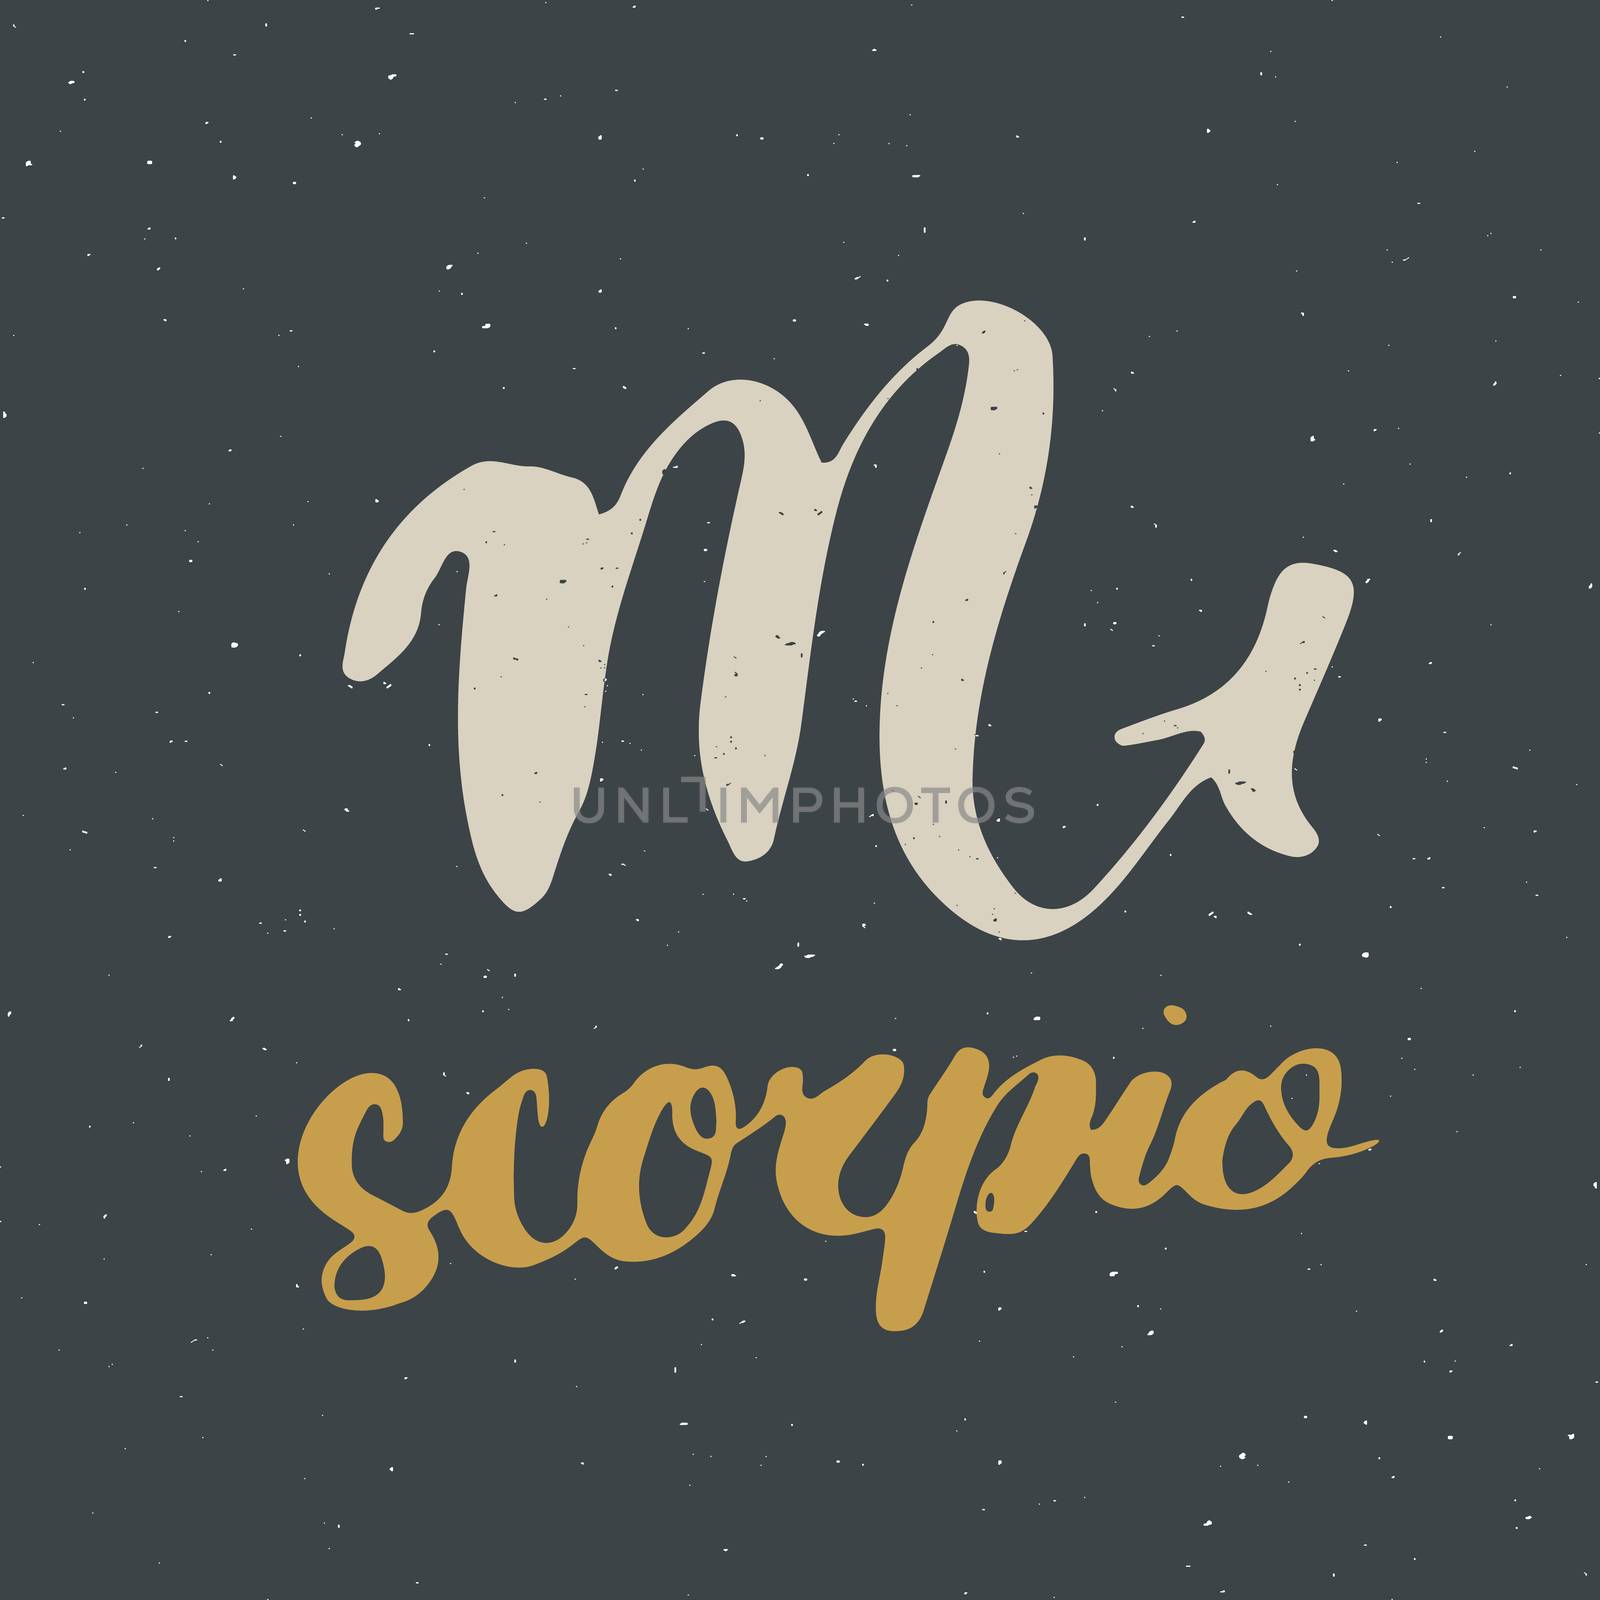 Zodiac sign Scorpio and lettering. Hand drawn horoscope astrology symbol, grunge textured design, typography print, vector illustration .